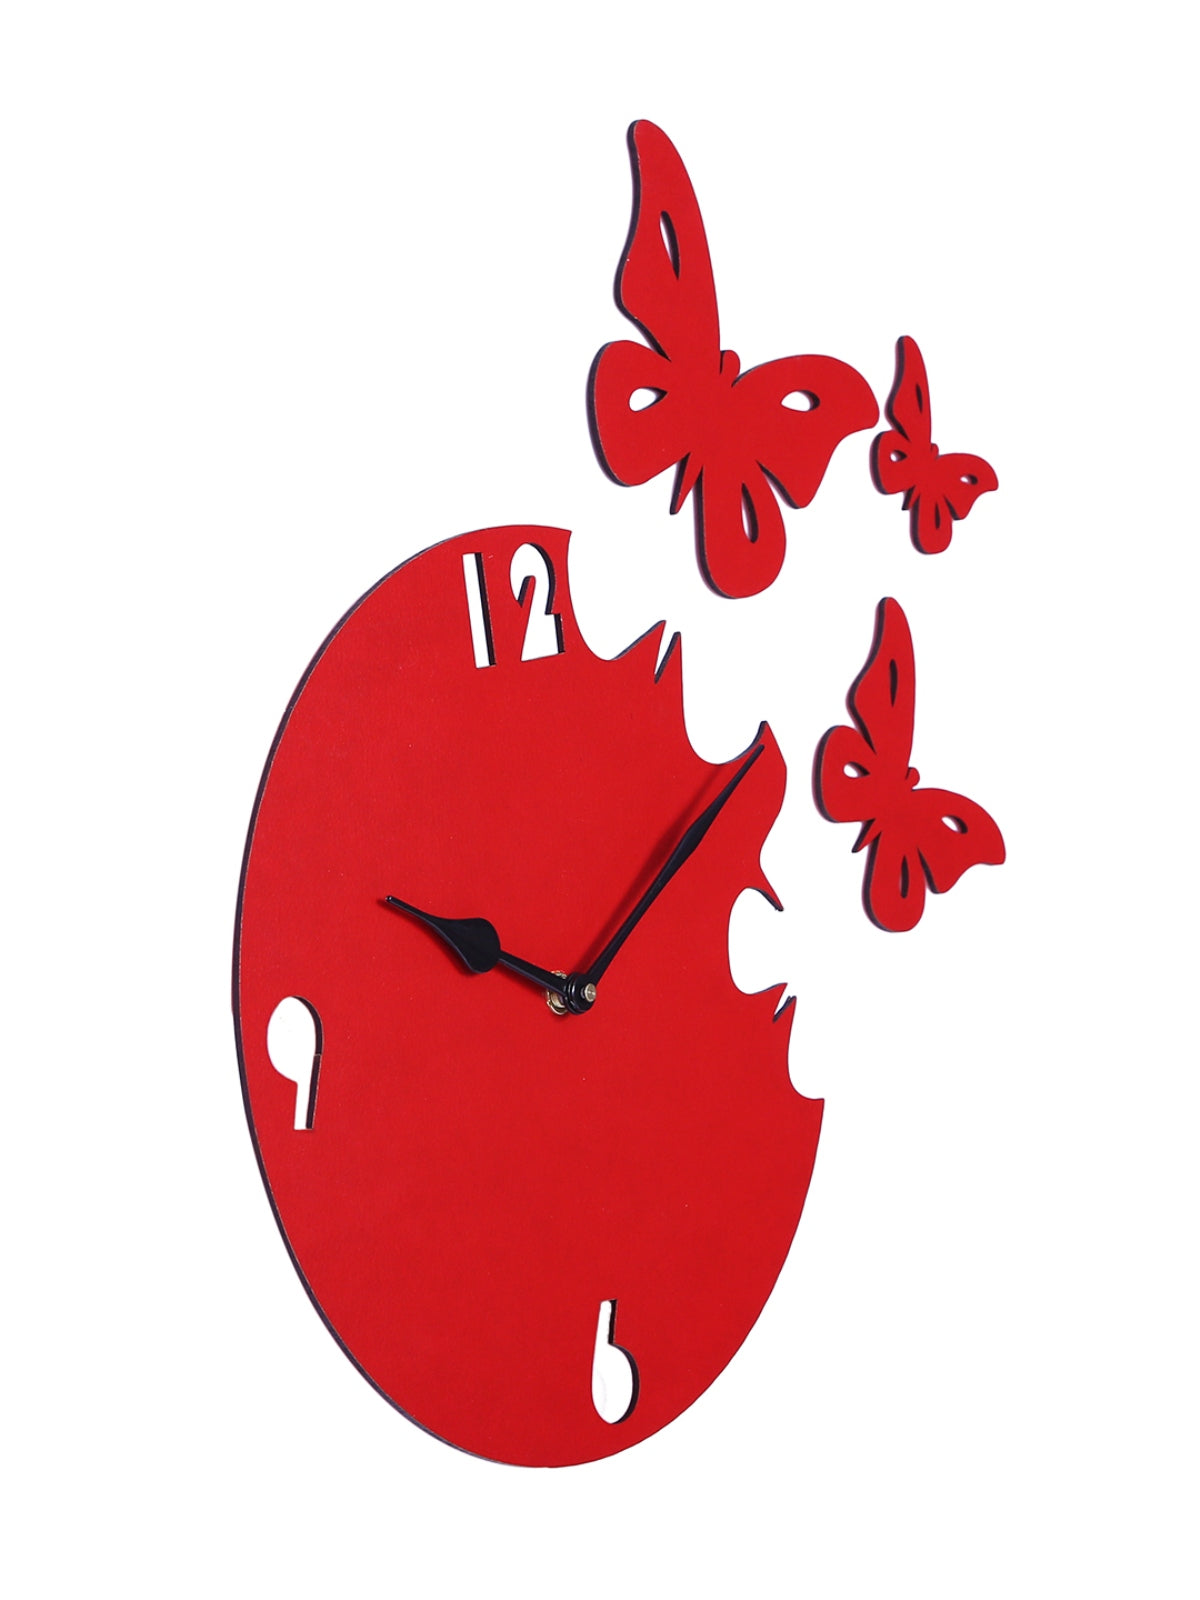 Butterfly Designer Wooden Wall Clock for Home, Red